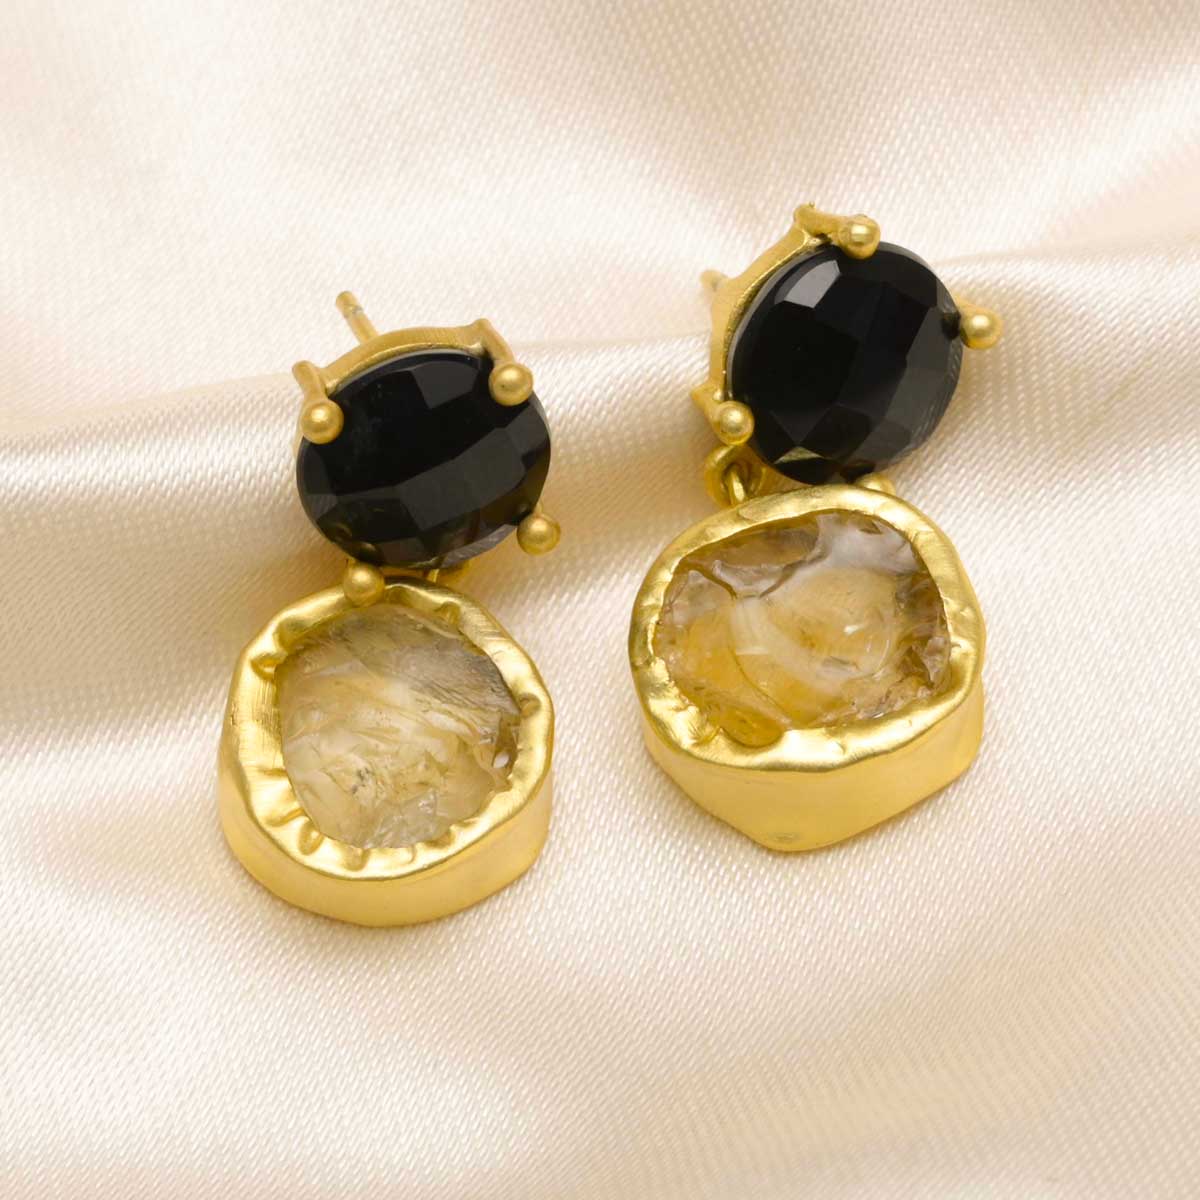 The Charcoal and Fire Gold Earrings